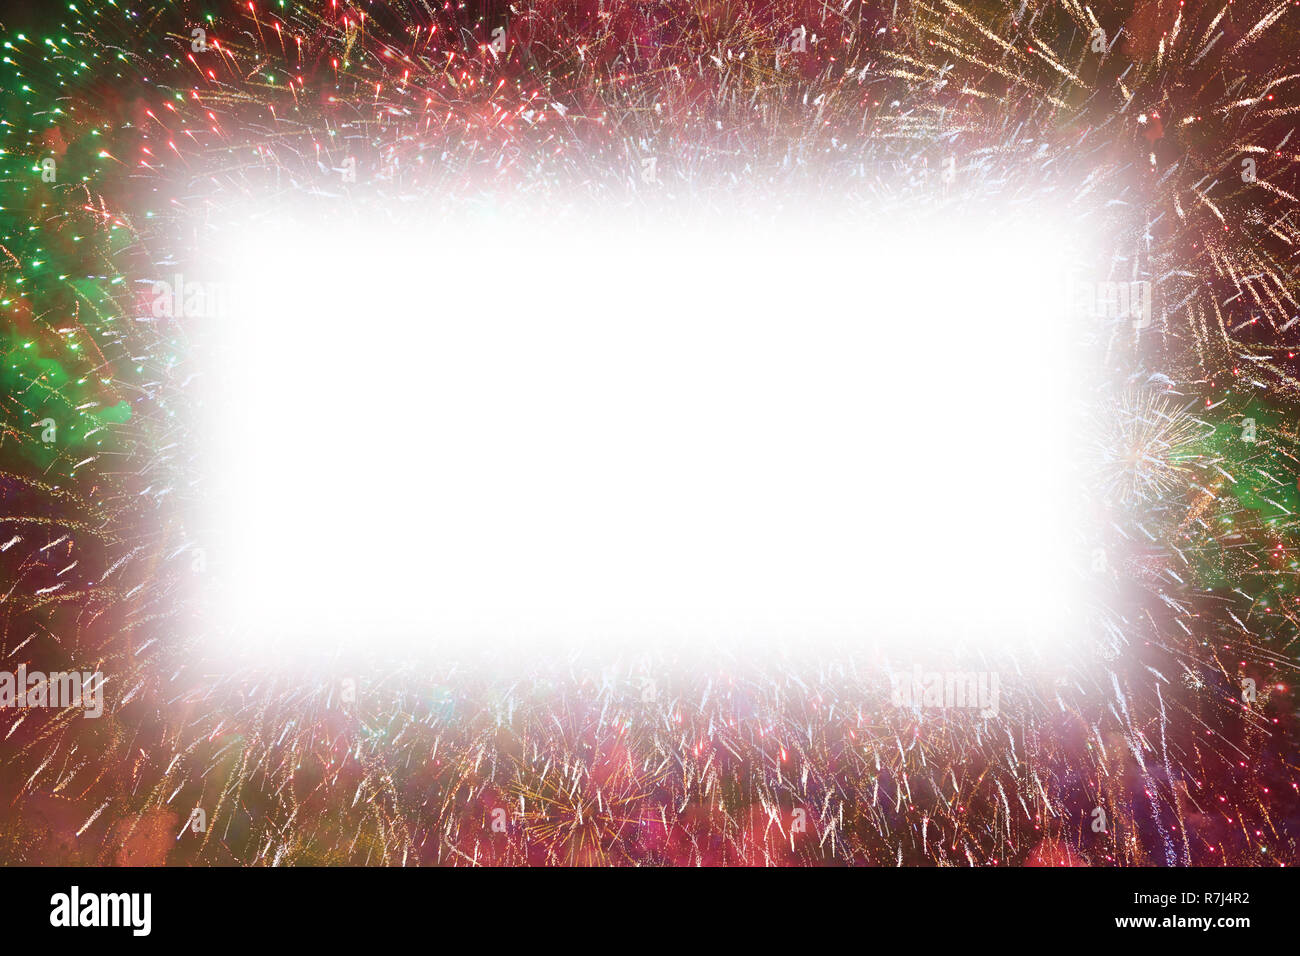 Colorful fireworks with white rectangle glowing edges copy space in the middle Stock Photo